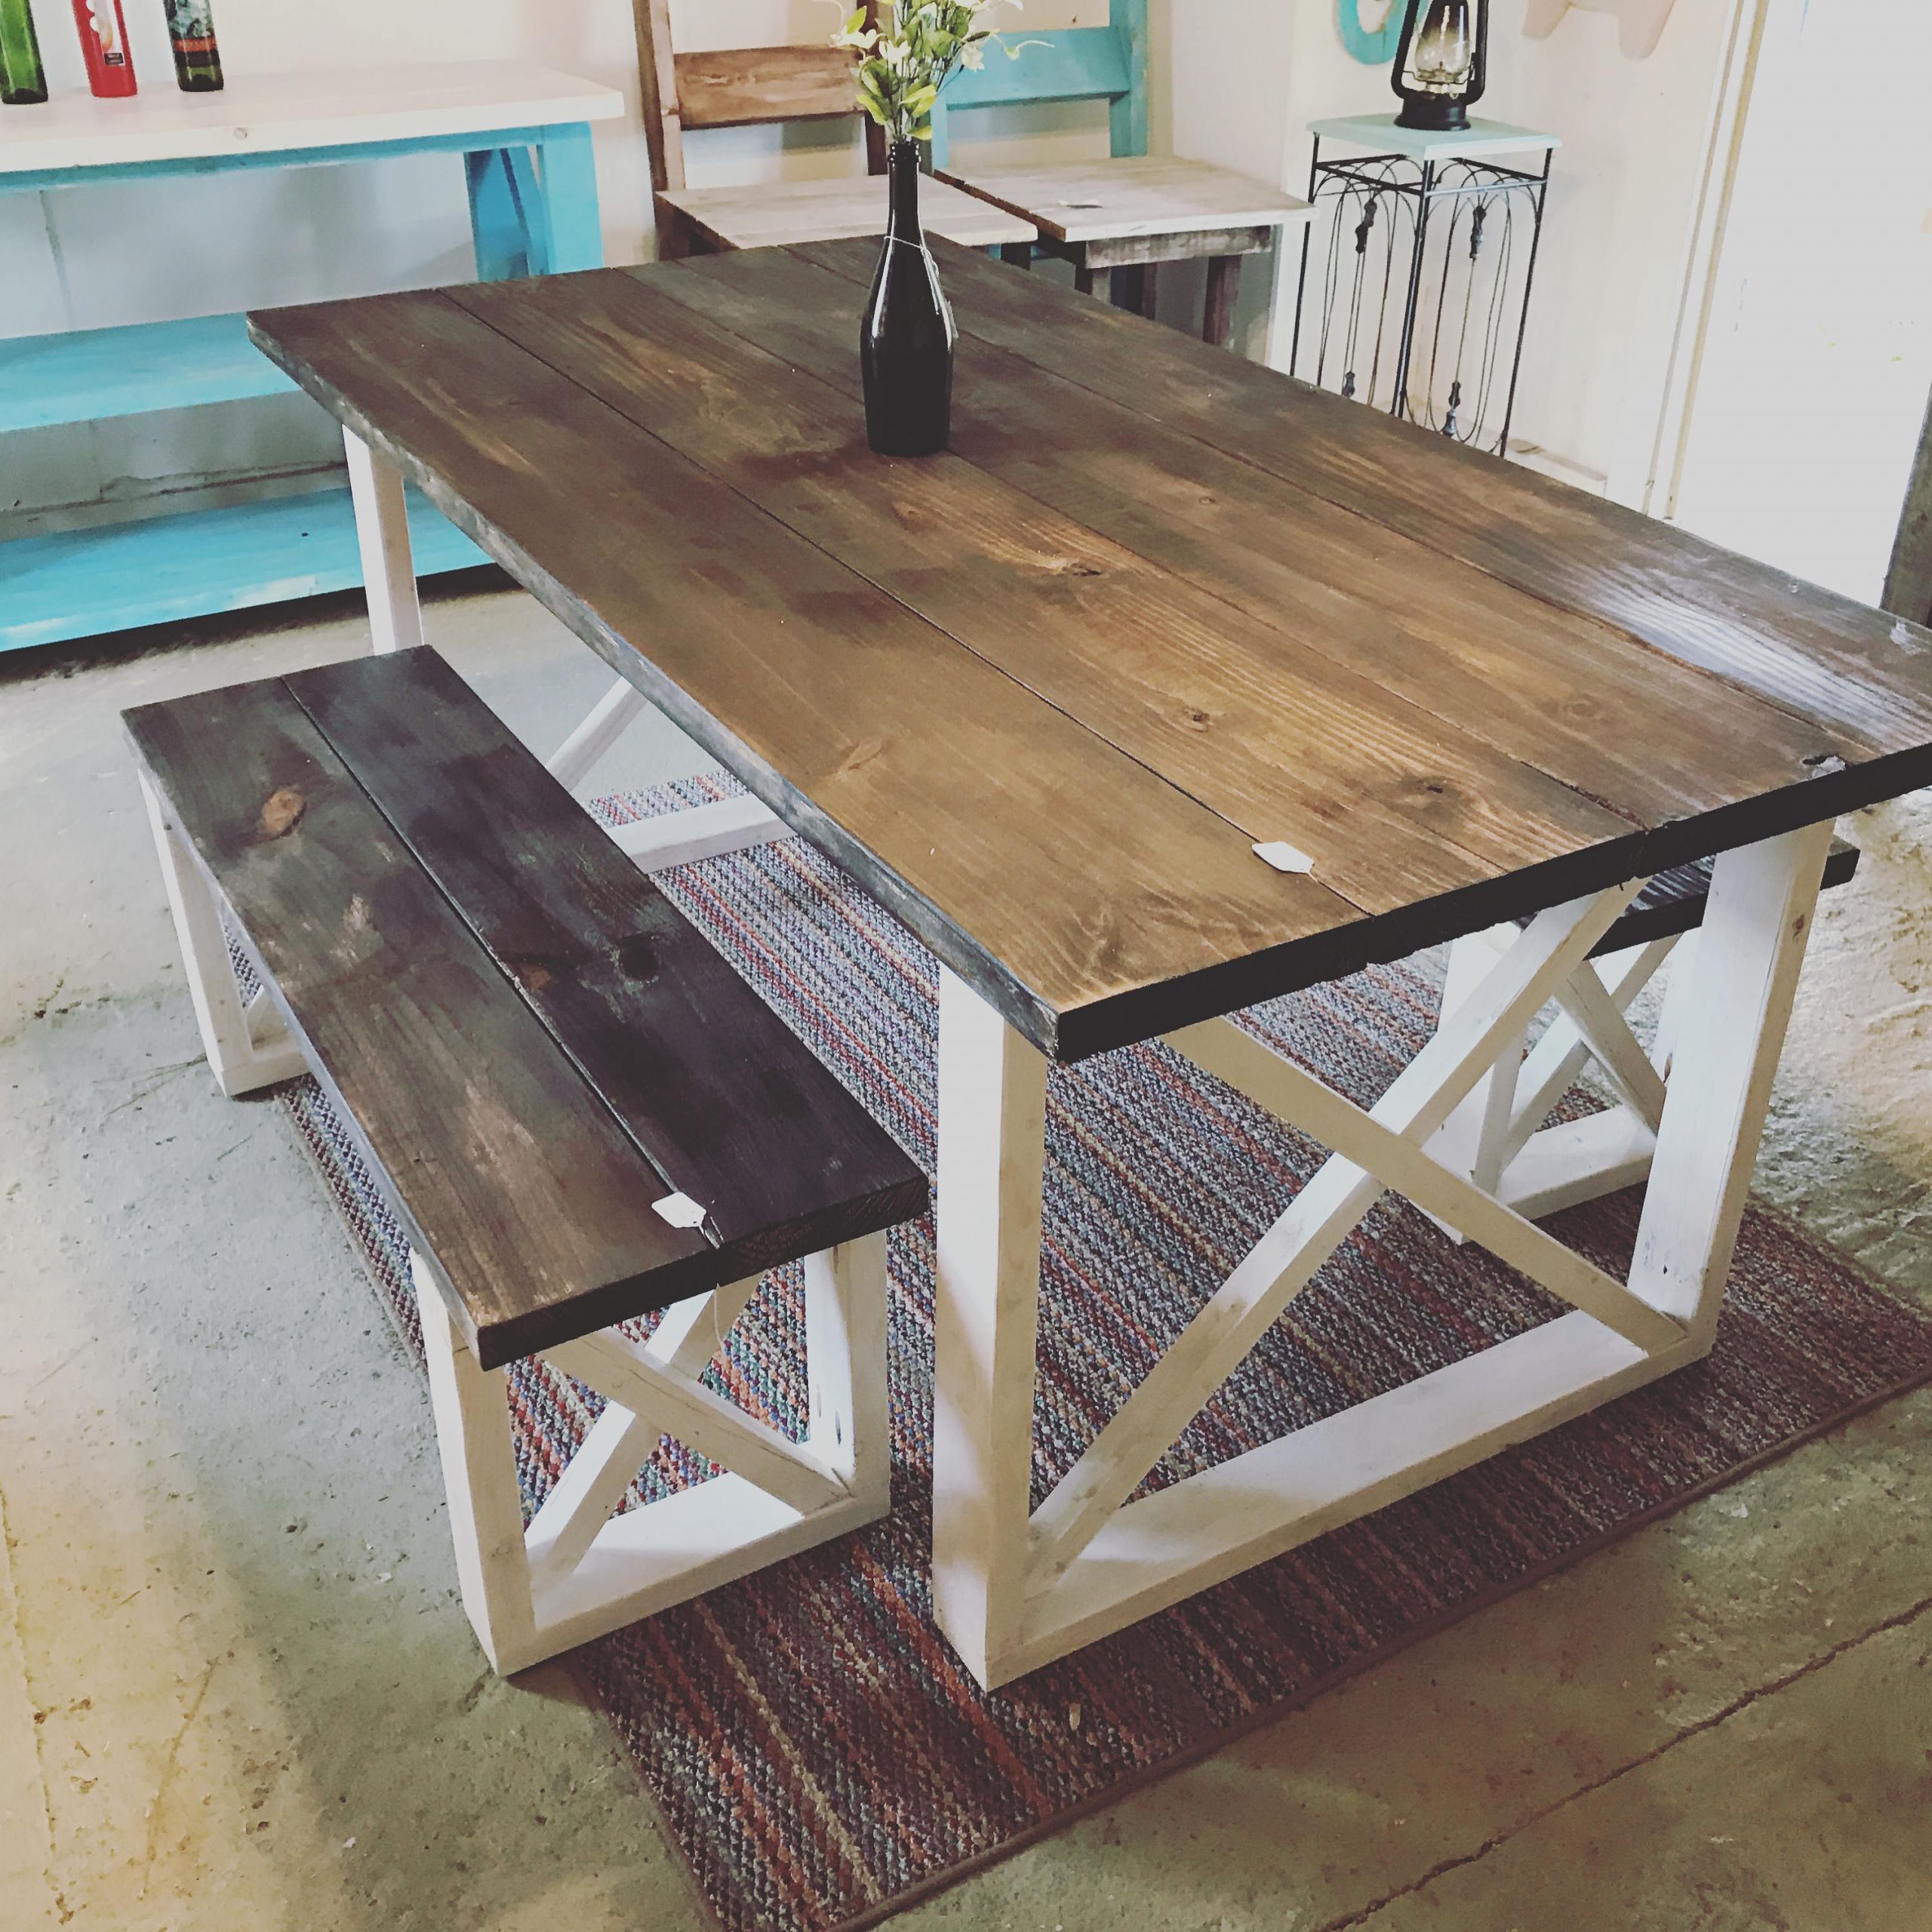 Rustic Kitchen Tables
 Rustic Farmhouse Table With Benches with Dark Walnut Top